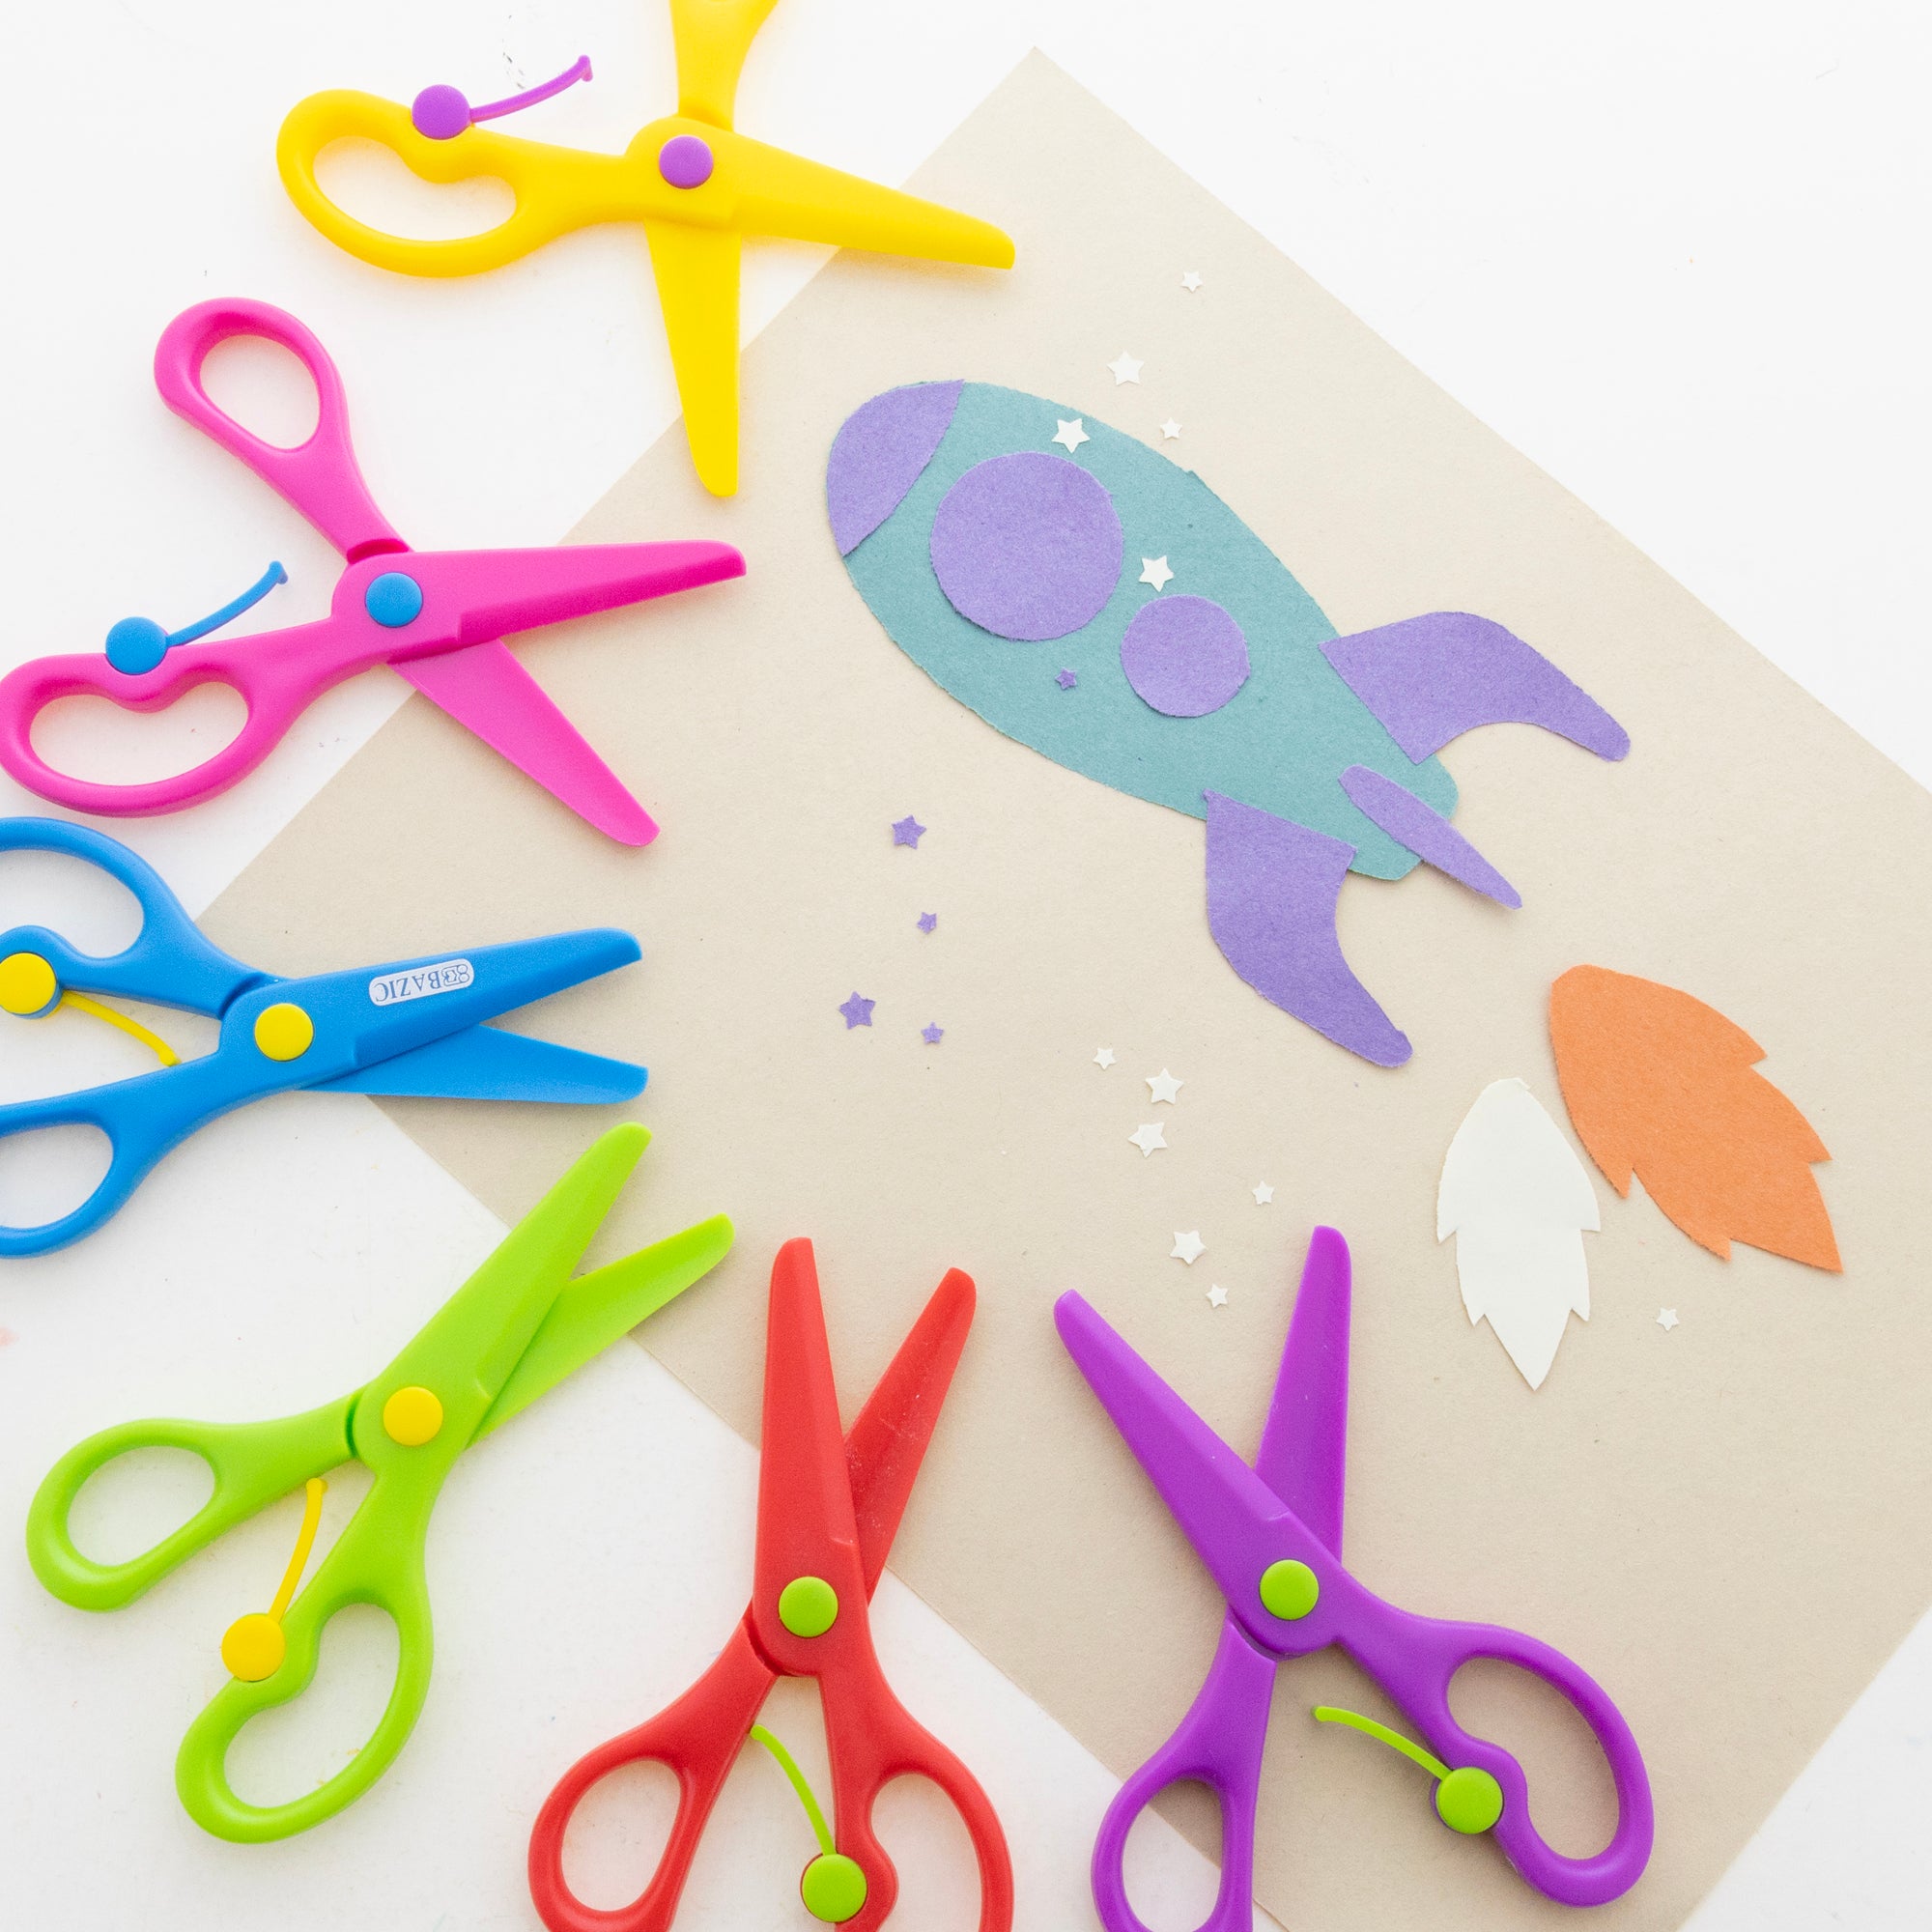 Mixed Color Safety Abs Plastic Material Scissors Children's